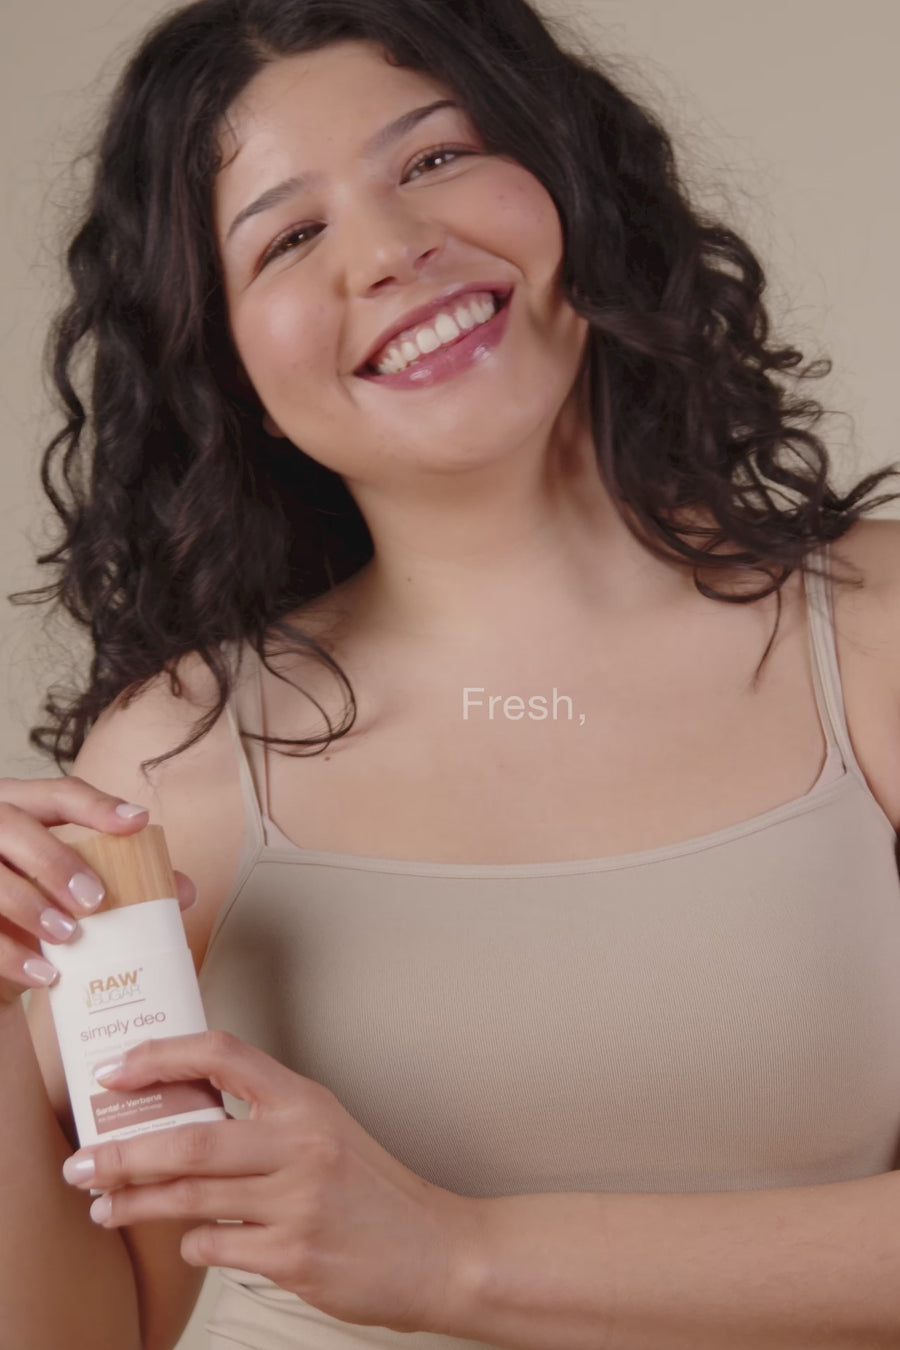 deo in use by woman smiling